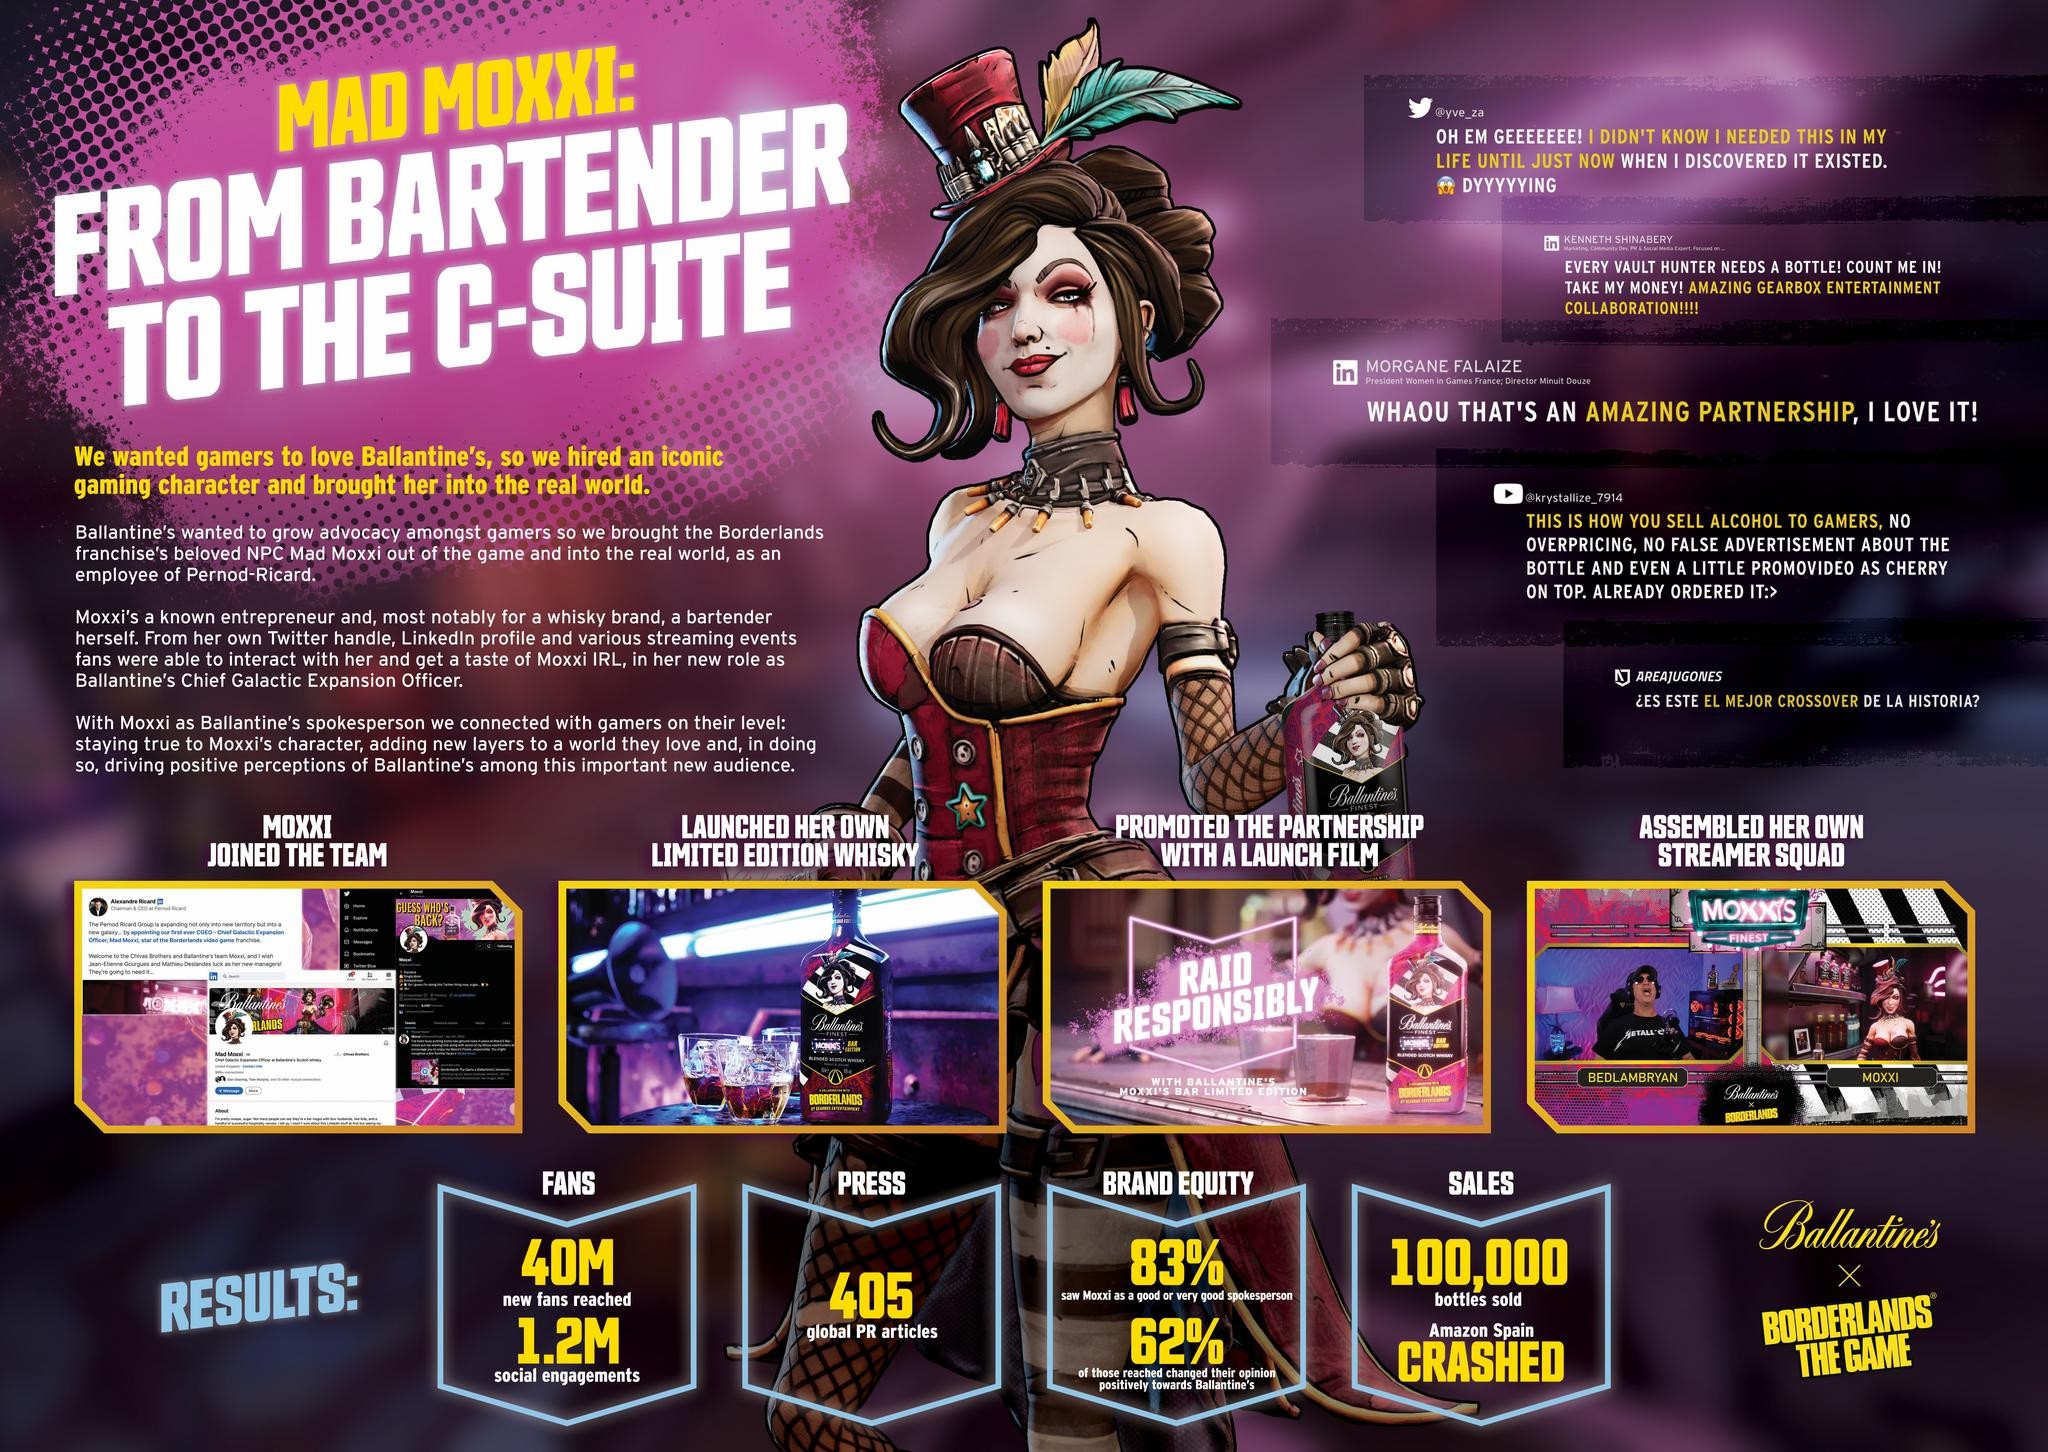 Moxxi: From Bartender to the C-Suite